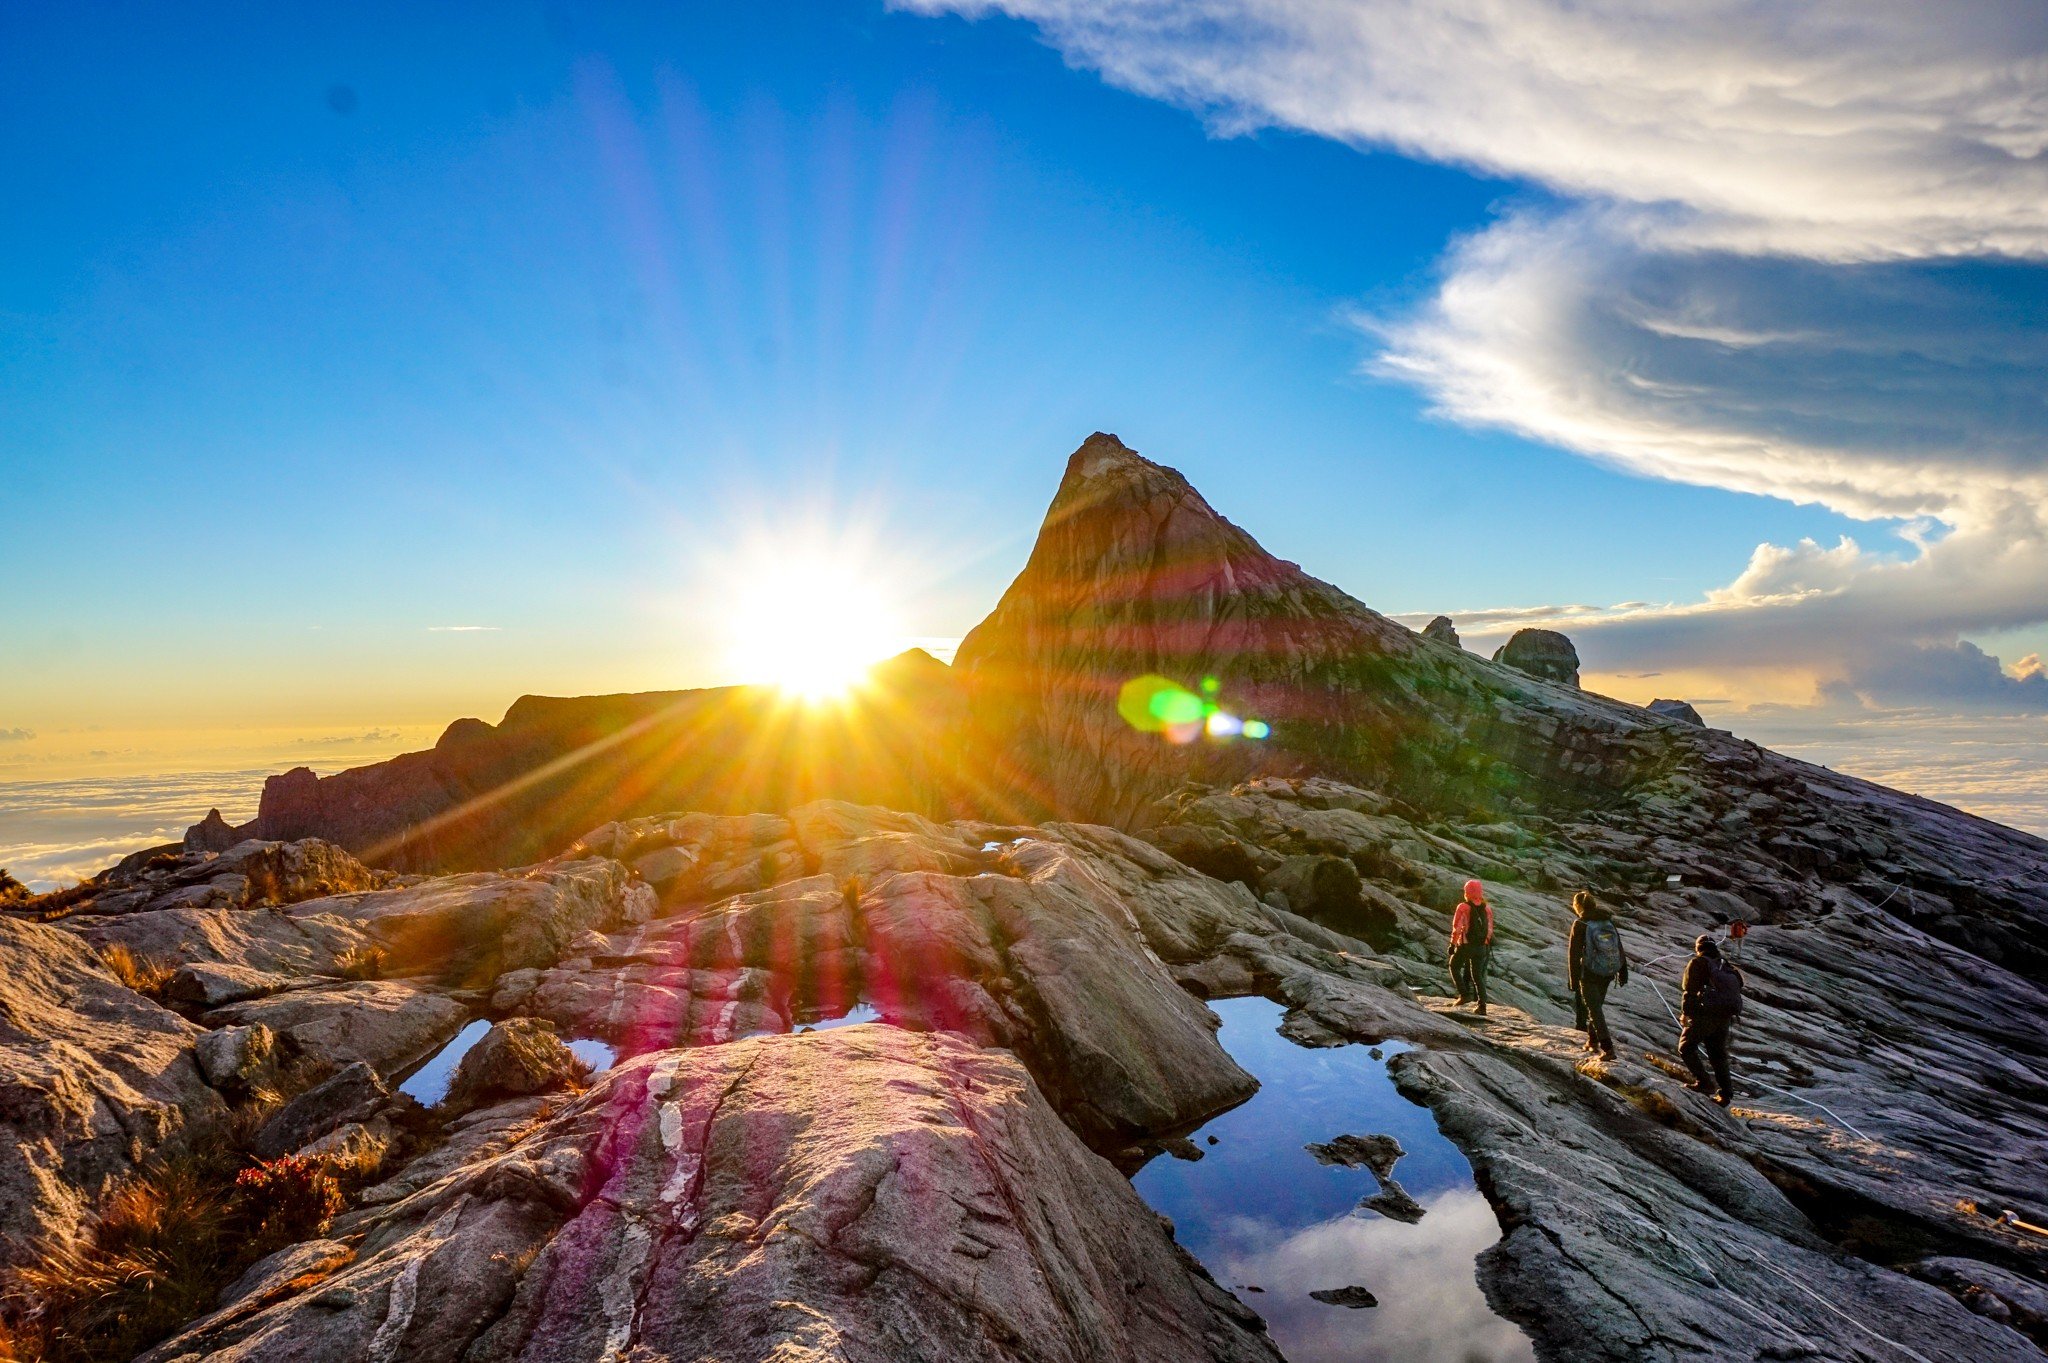 Sunrise above the rocky terrain of Malaysian Borneo’s Mount Kinabalu on the hike down from Low’s Peak. Photo: Nam Cheah